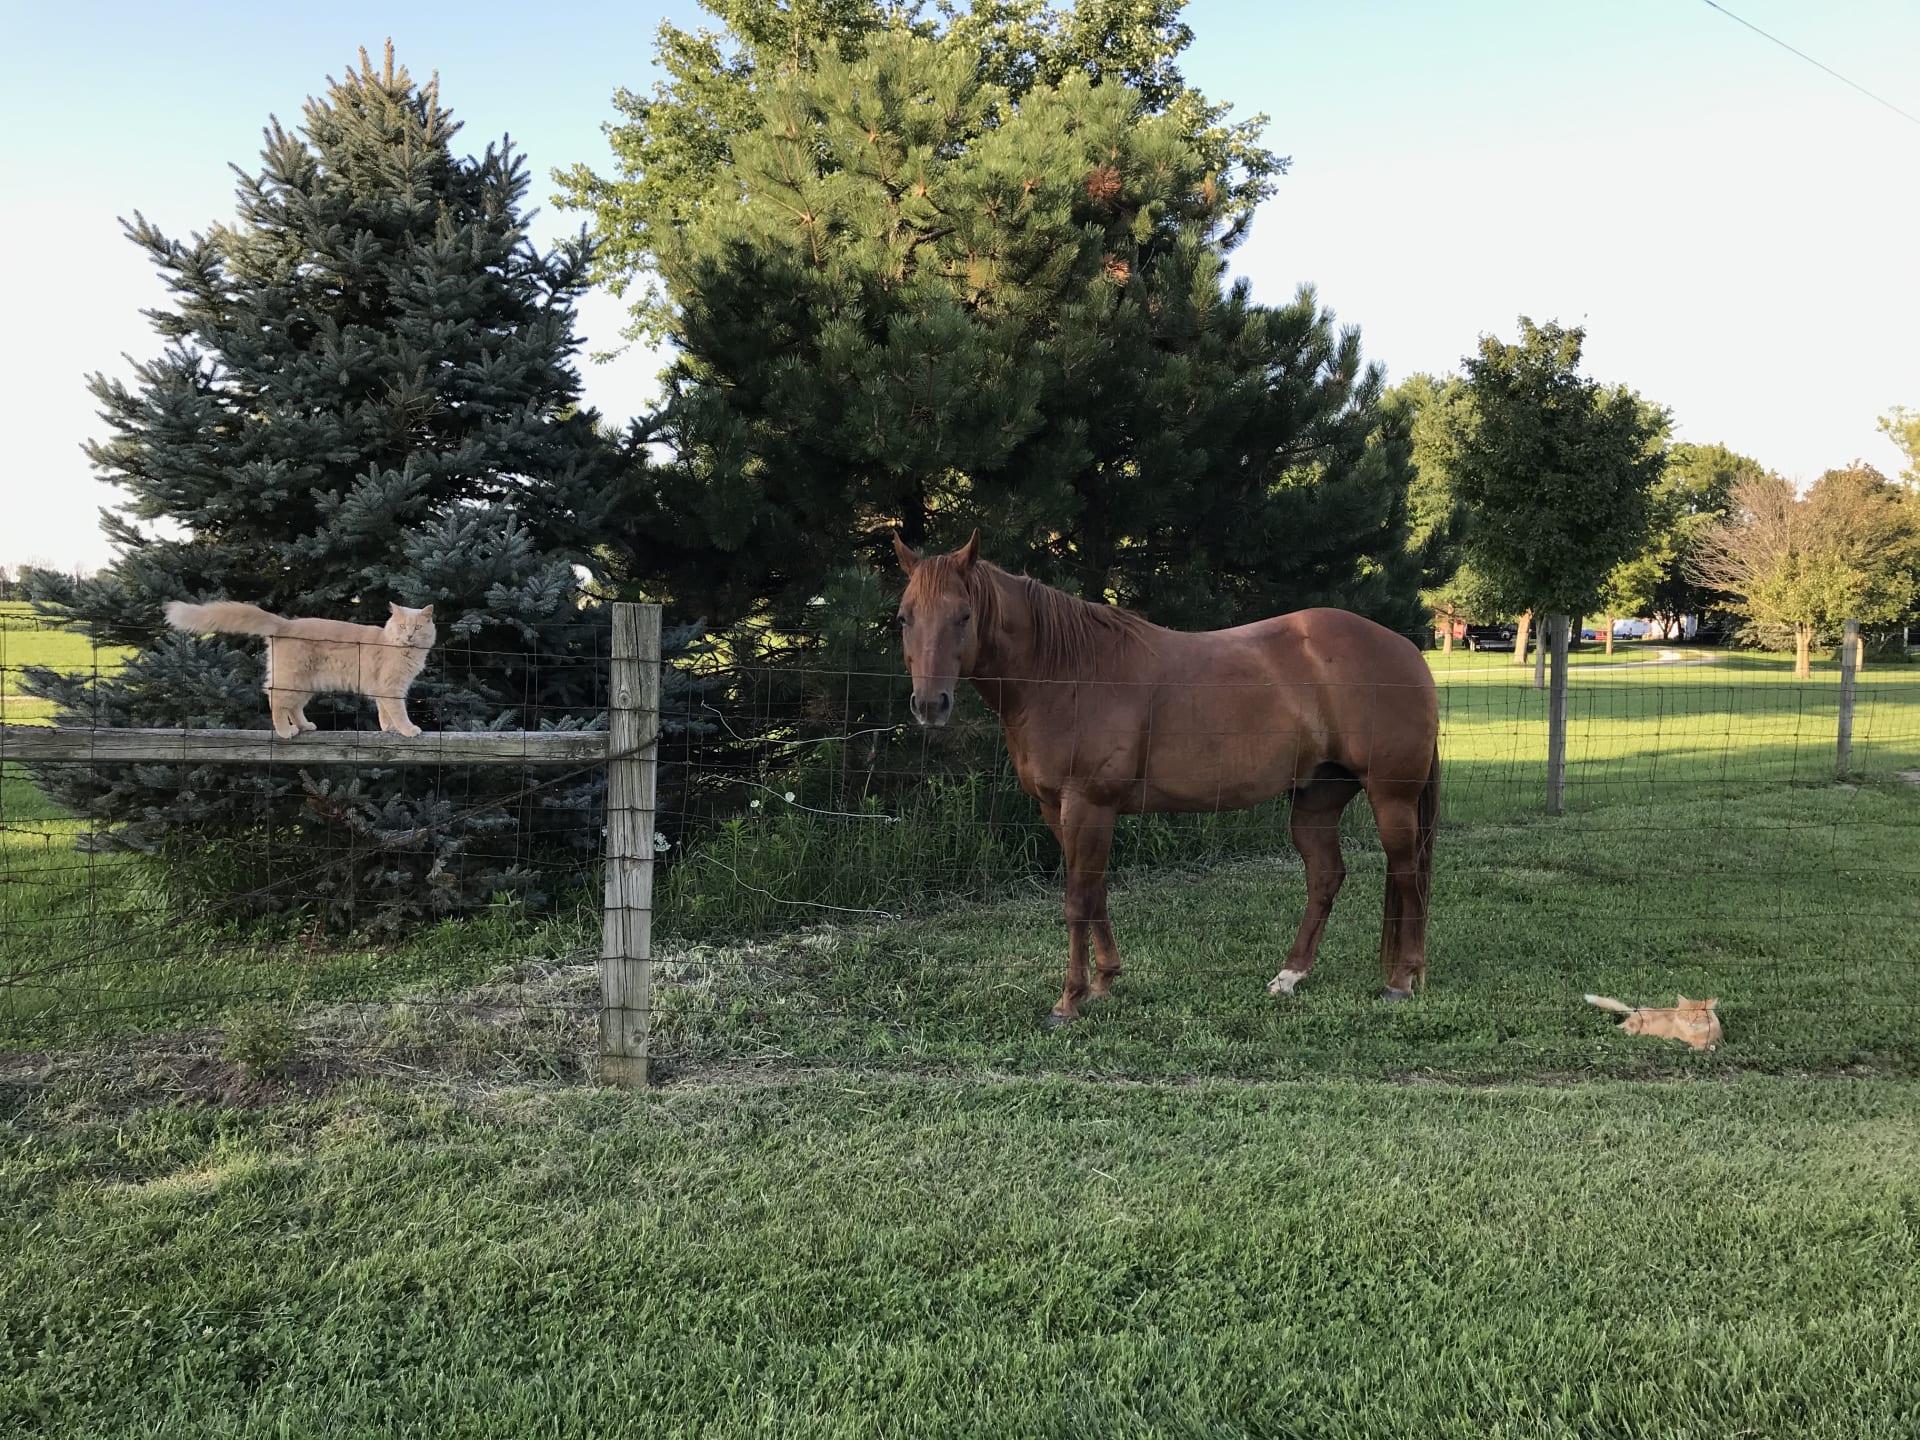 Leroy, George a American quarter horse and Lowell welcome you to Shalamar Farm! 